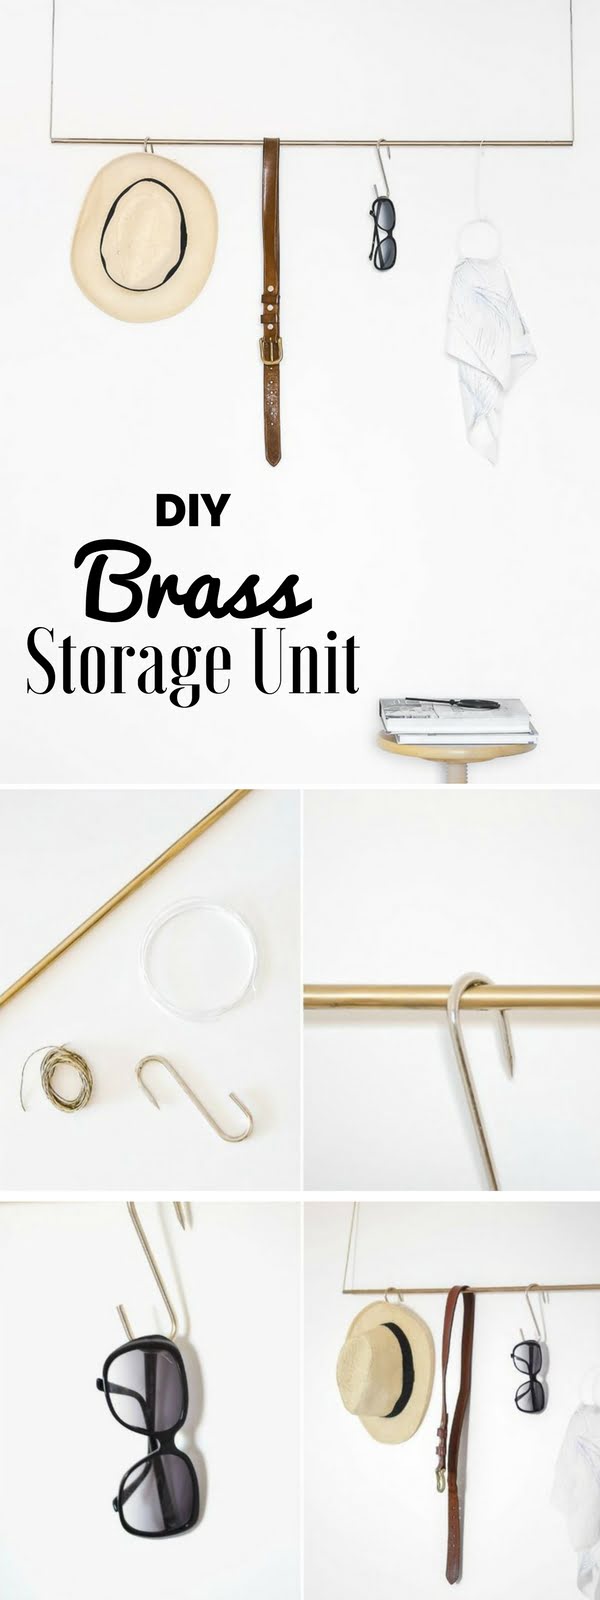 16 Beautiful DIY Bedroom Decor Ideas That Will Inspire You - Check out how to make an easy DIY Brass Storage Unit for bedroom decor